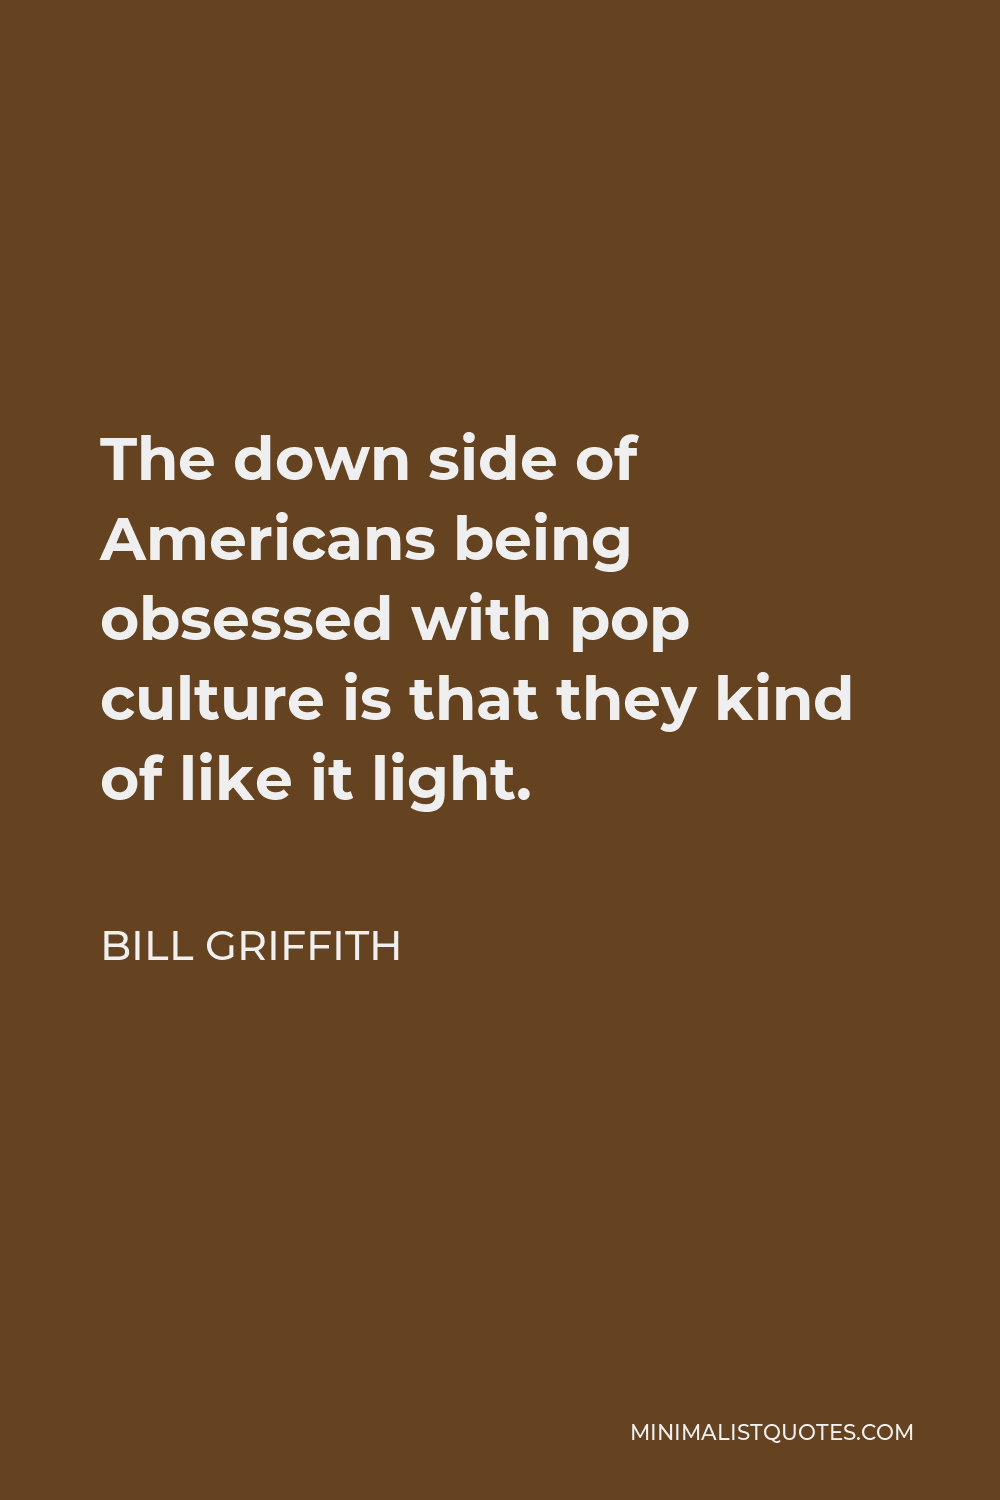 Bill Griffith Quote - The down side of Americans being obsessed with pop culture is that they kind of like it light.